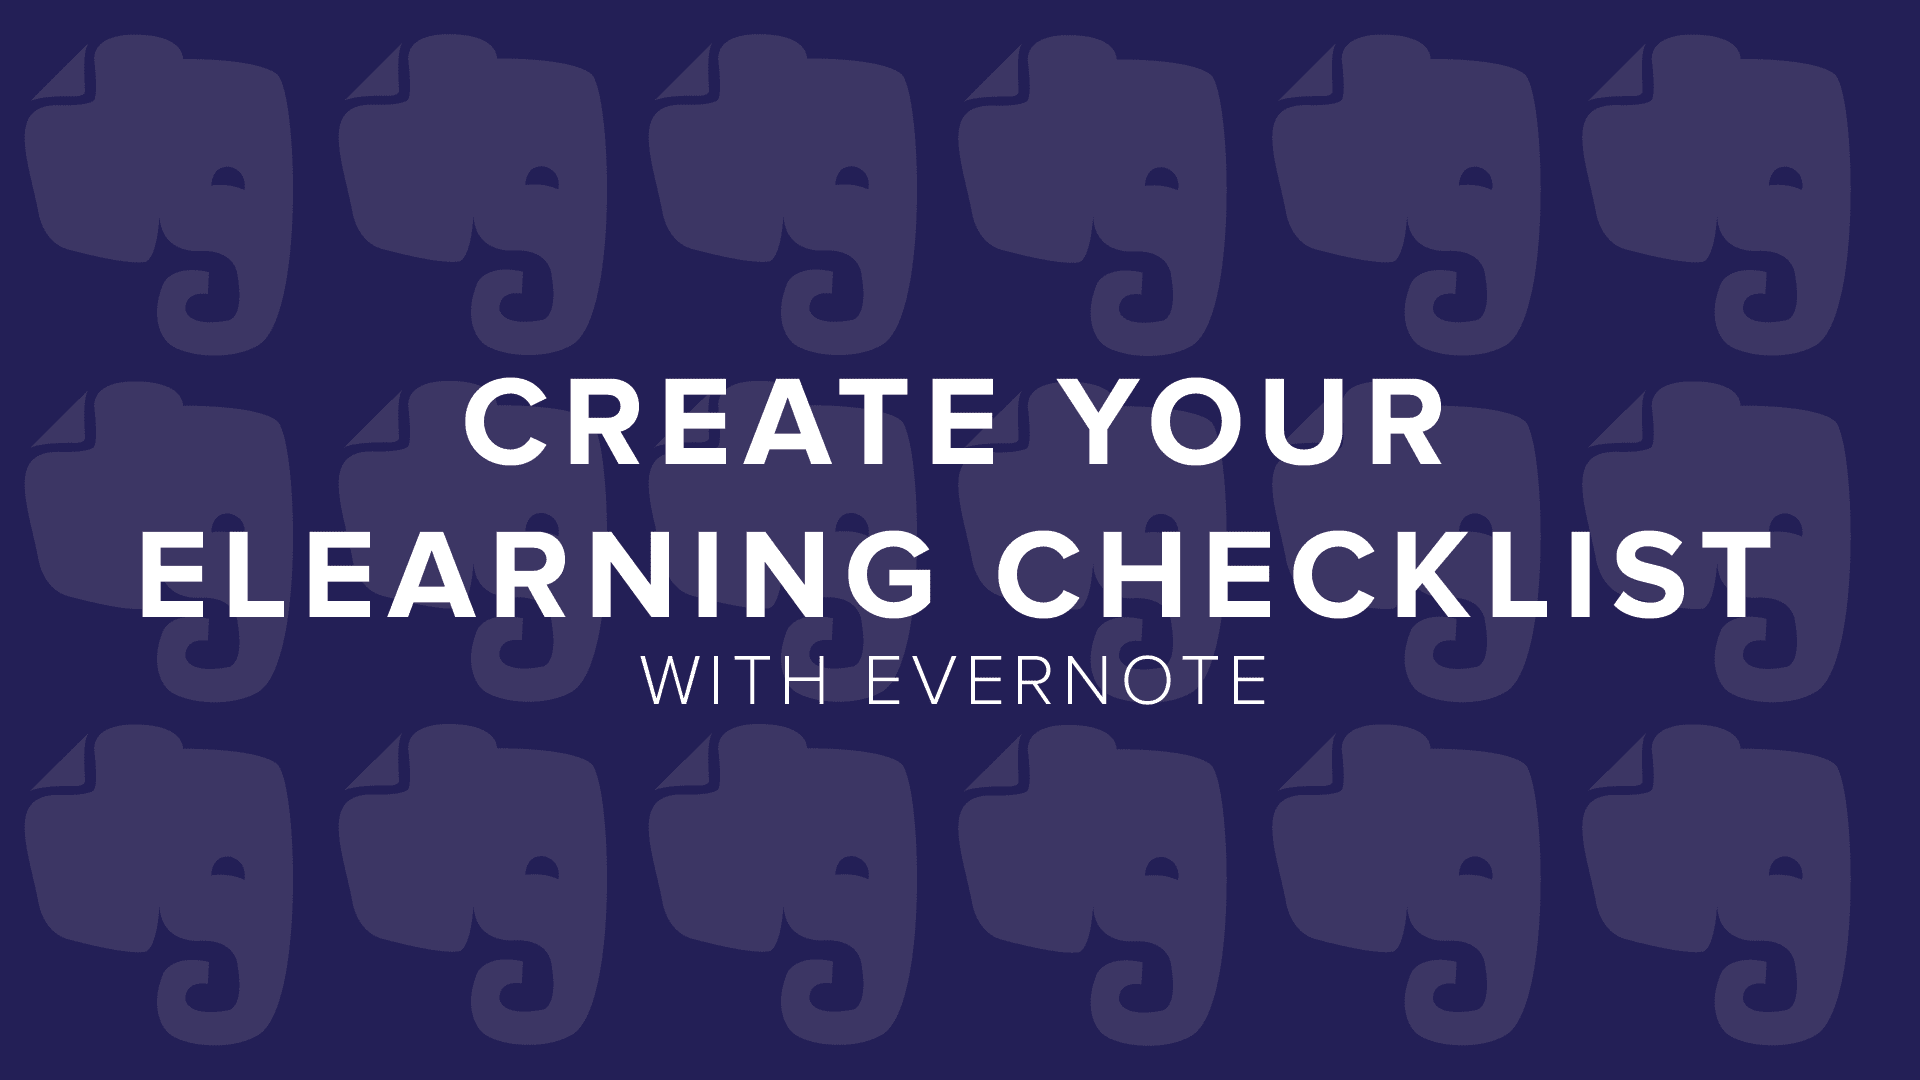 DigitalChalk: How to Create Your eLearning Checklist with Evernote